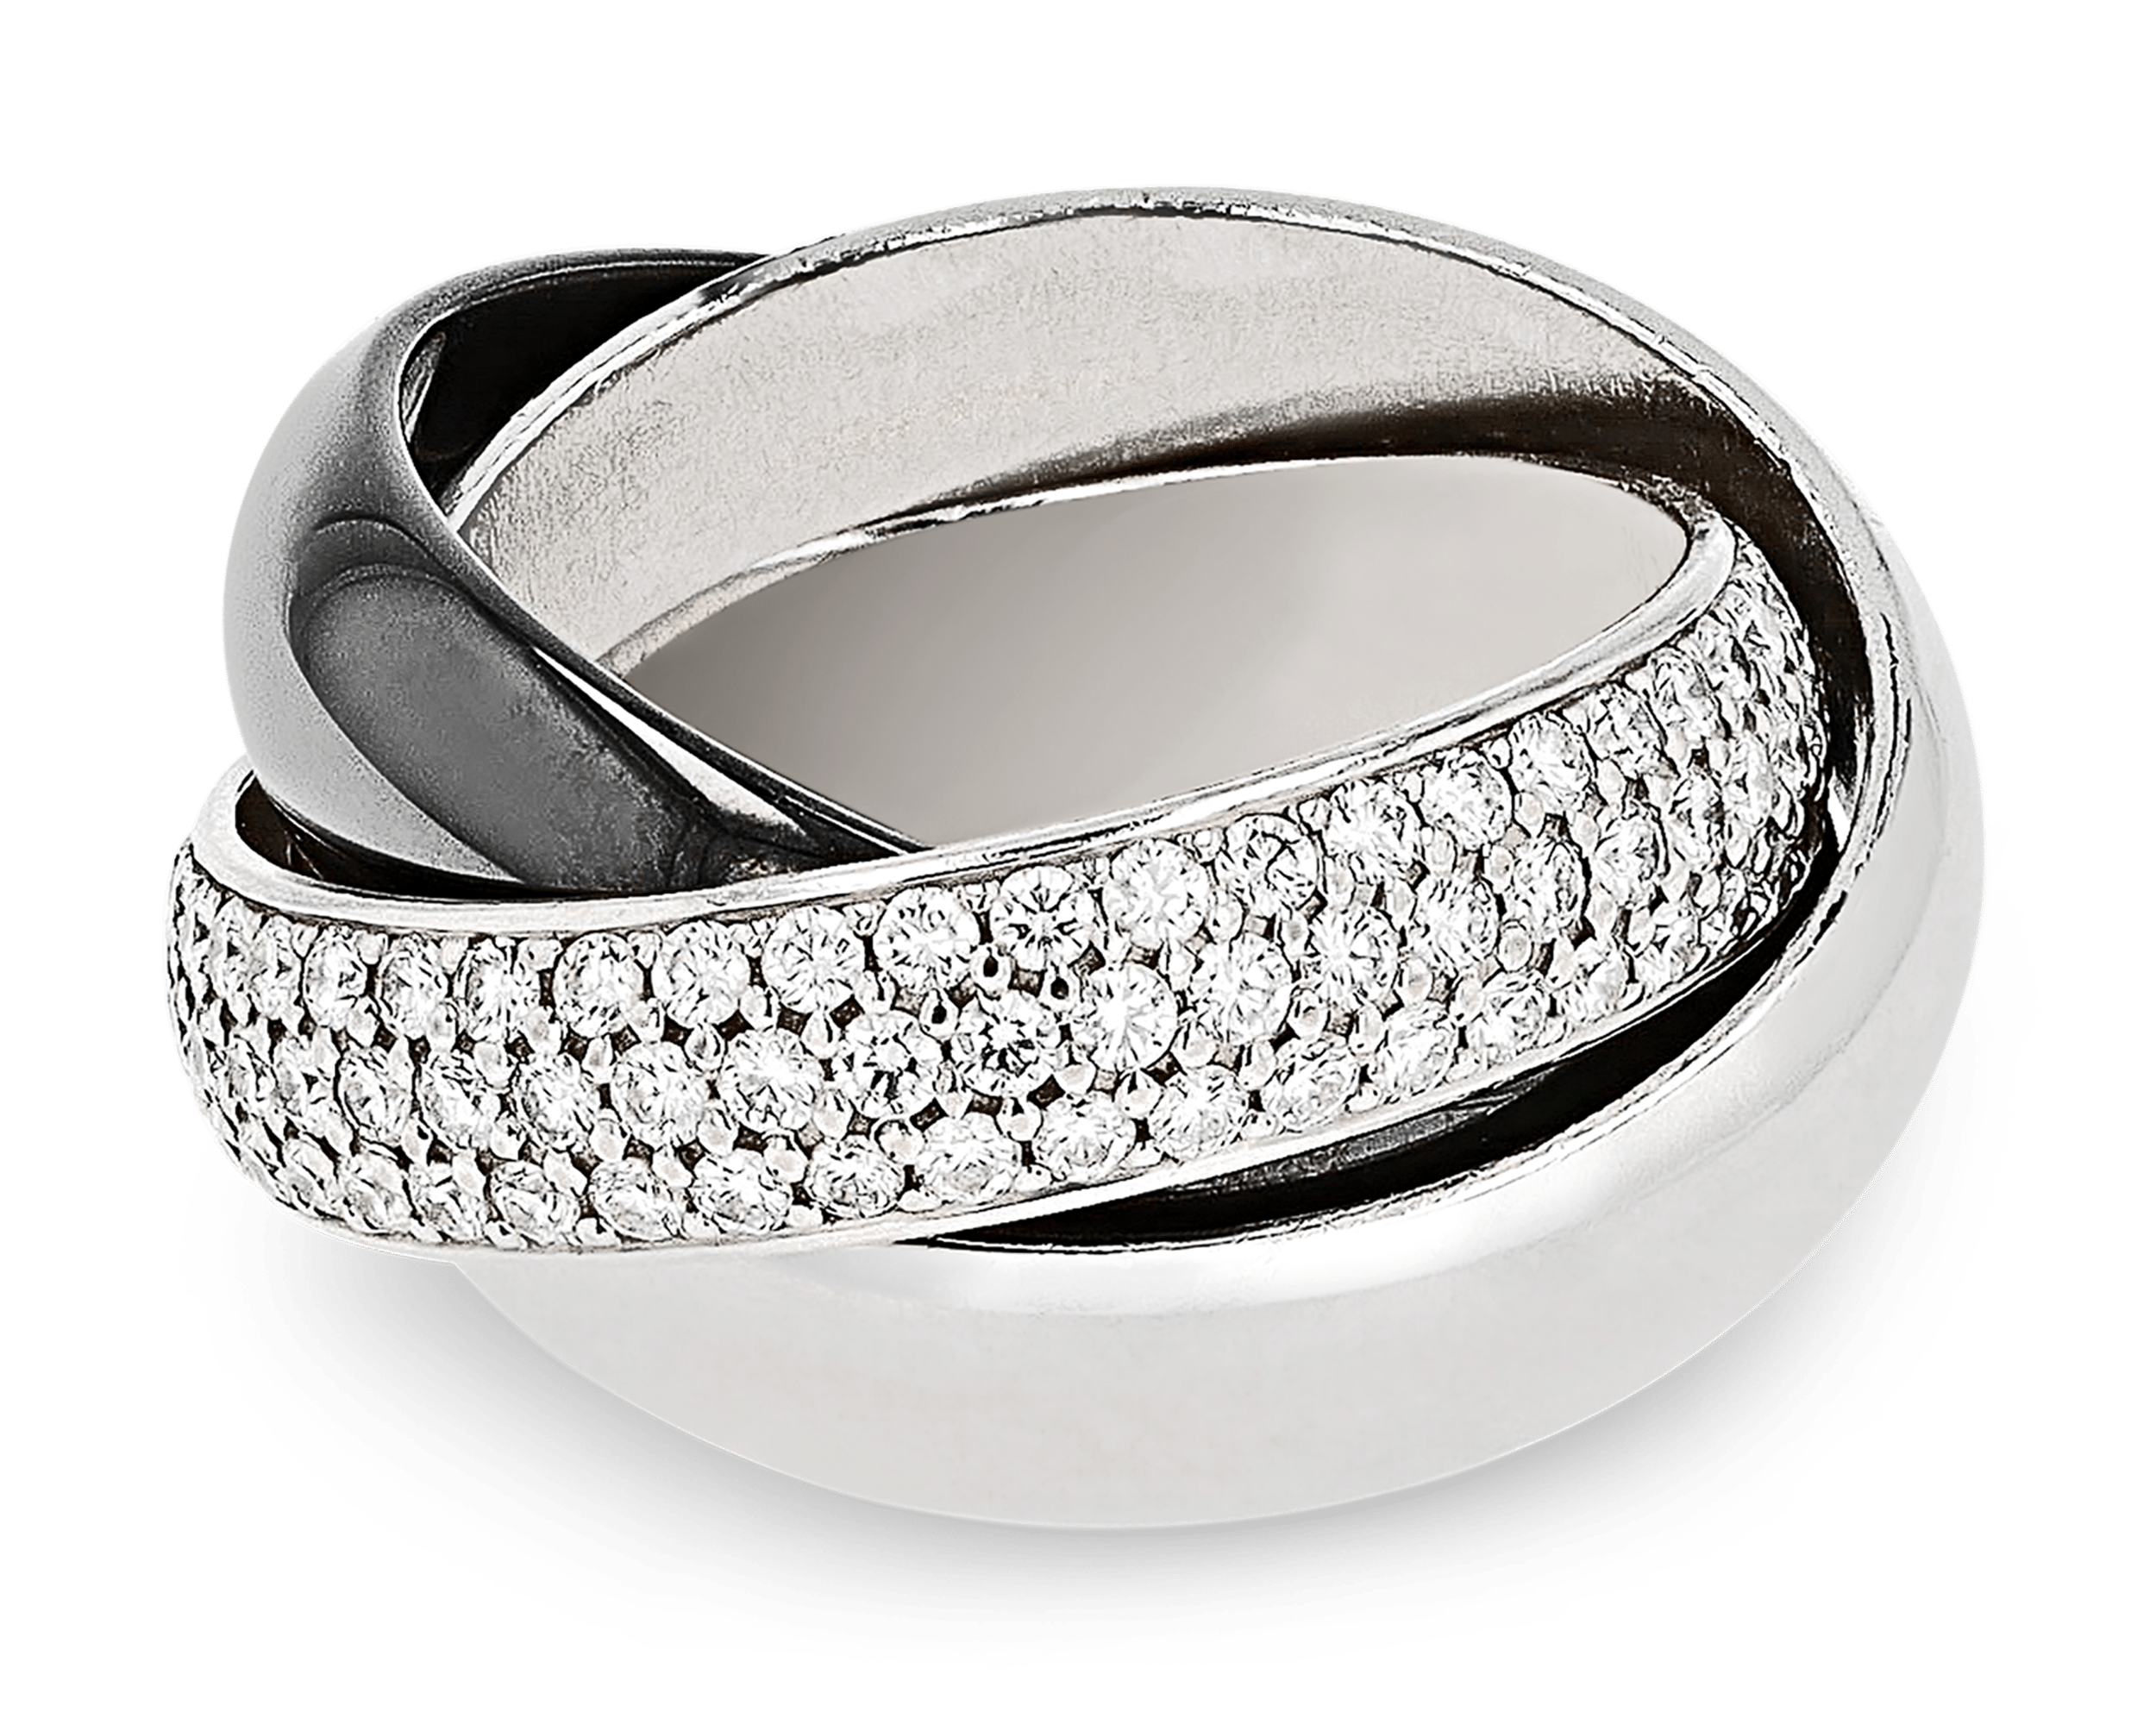 CRN4778300 - Trinity ring, large model - White gold, yellow gold, rose  gold, diamonds - Cartier